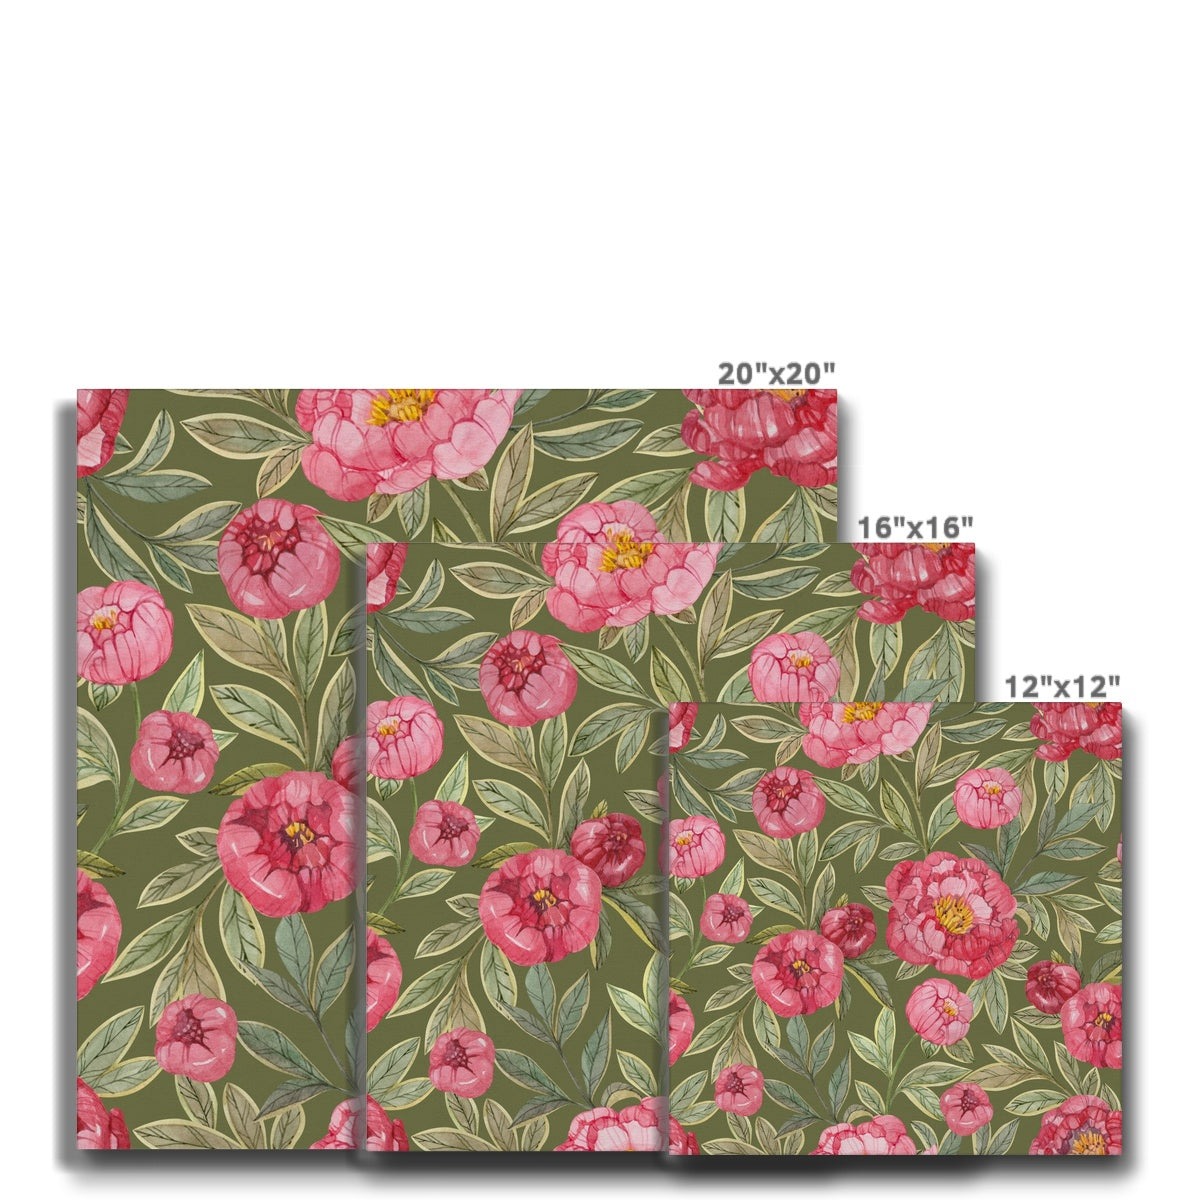 Bloomed Pink Rose Painting Canvas